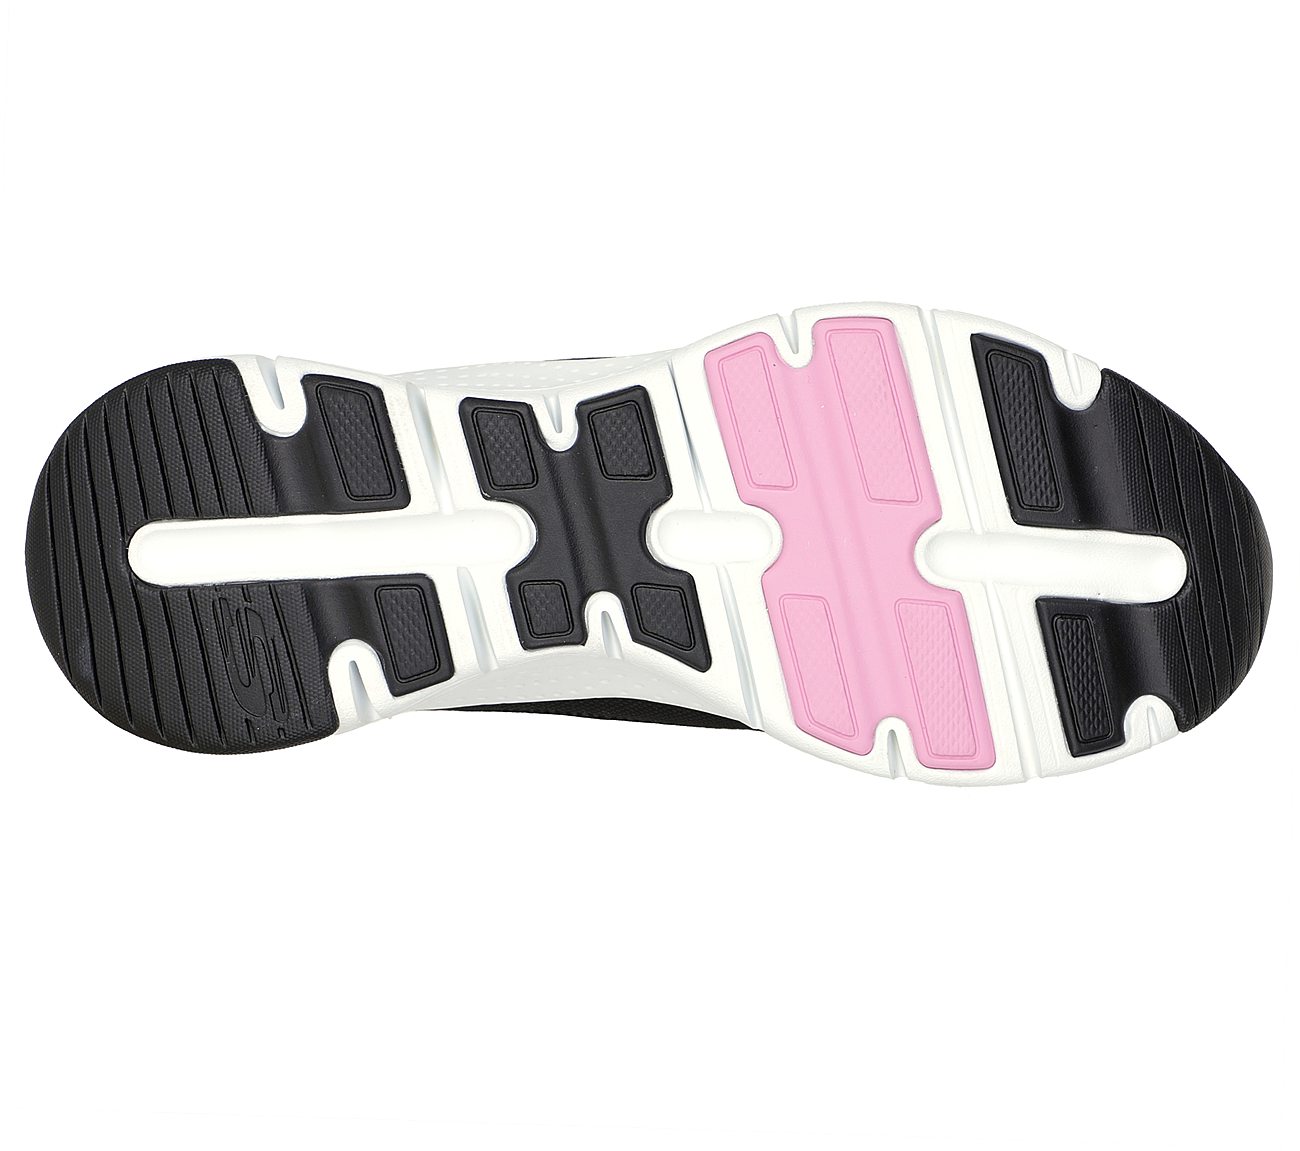 ARCH FIT-COOL OASIS, BLACK/WHITE/PINK Footwear Bottom View